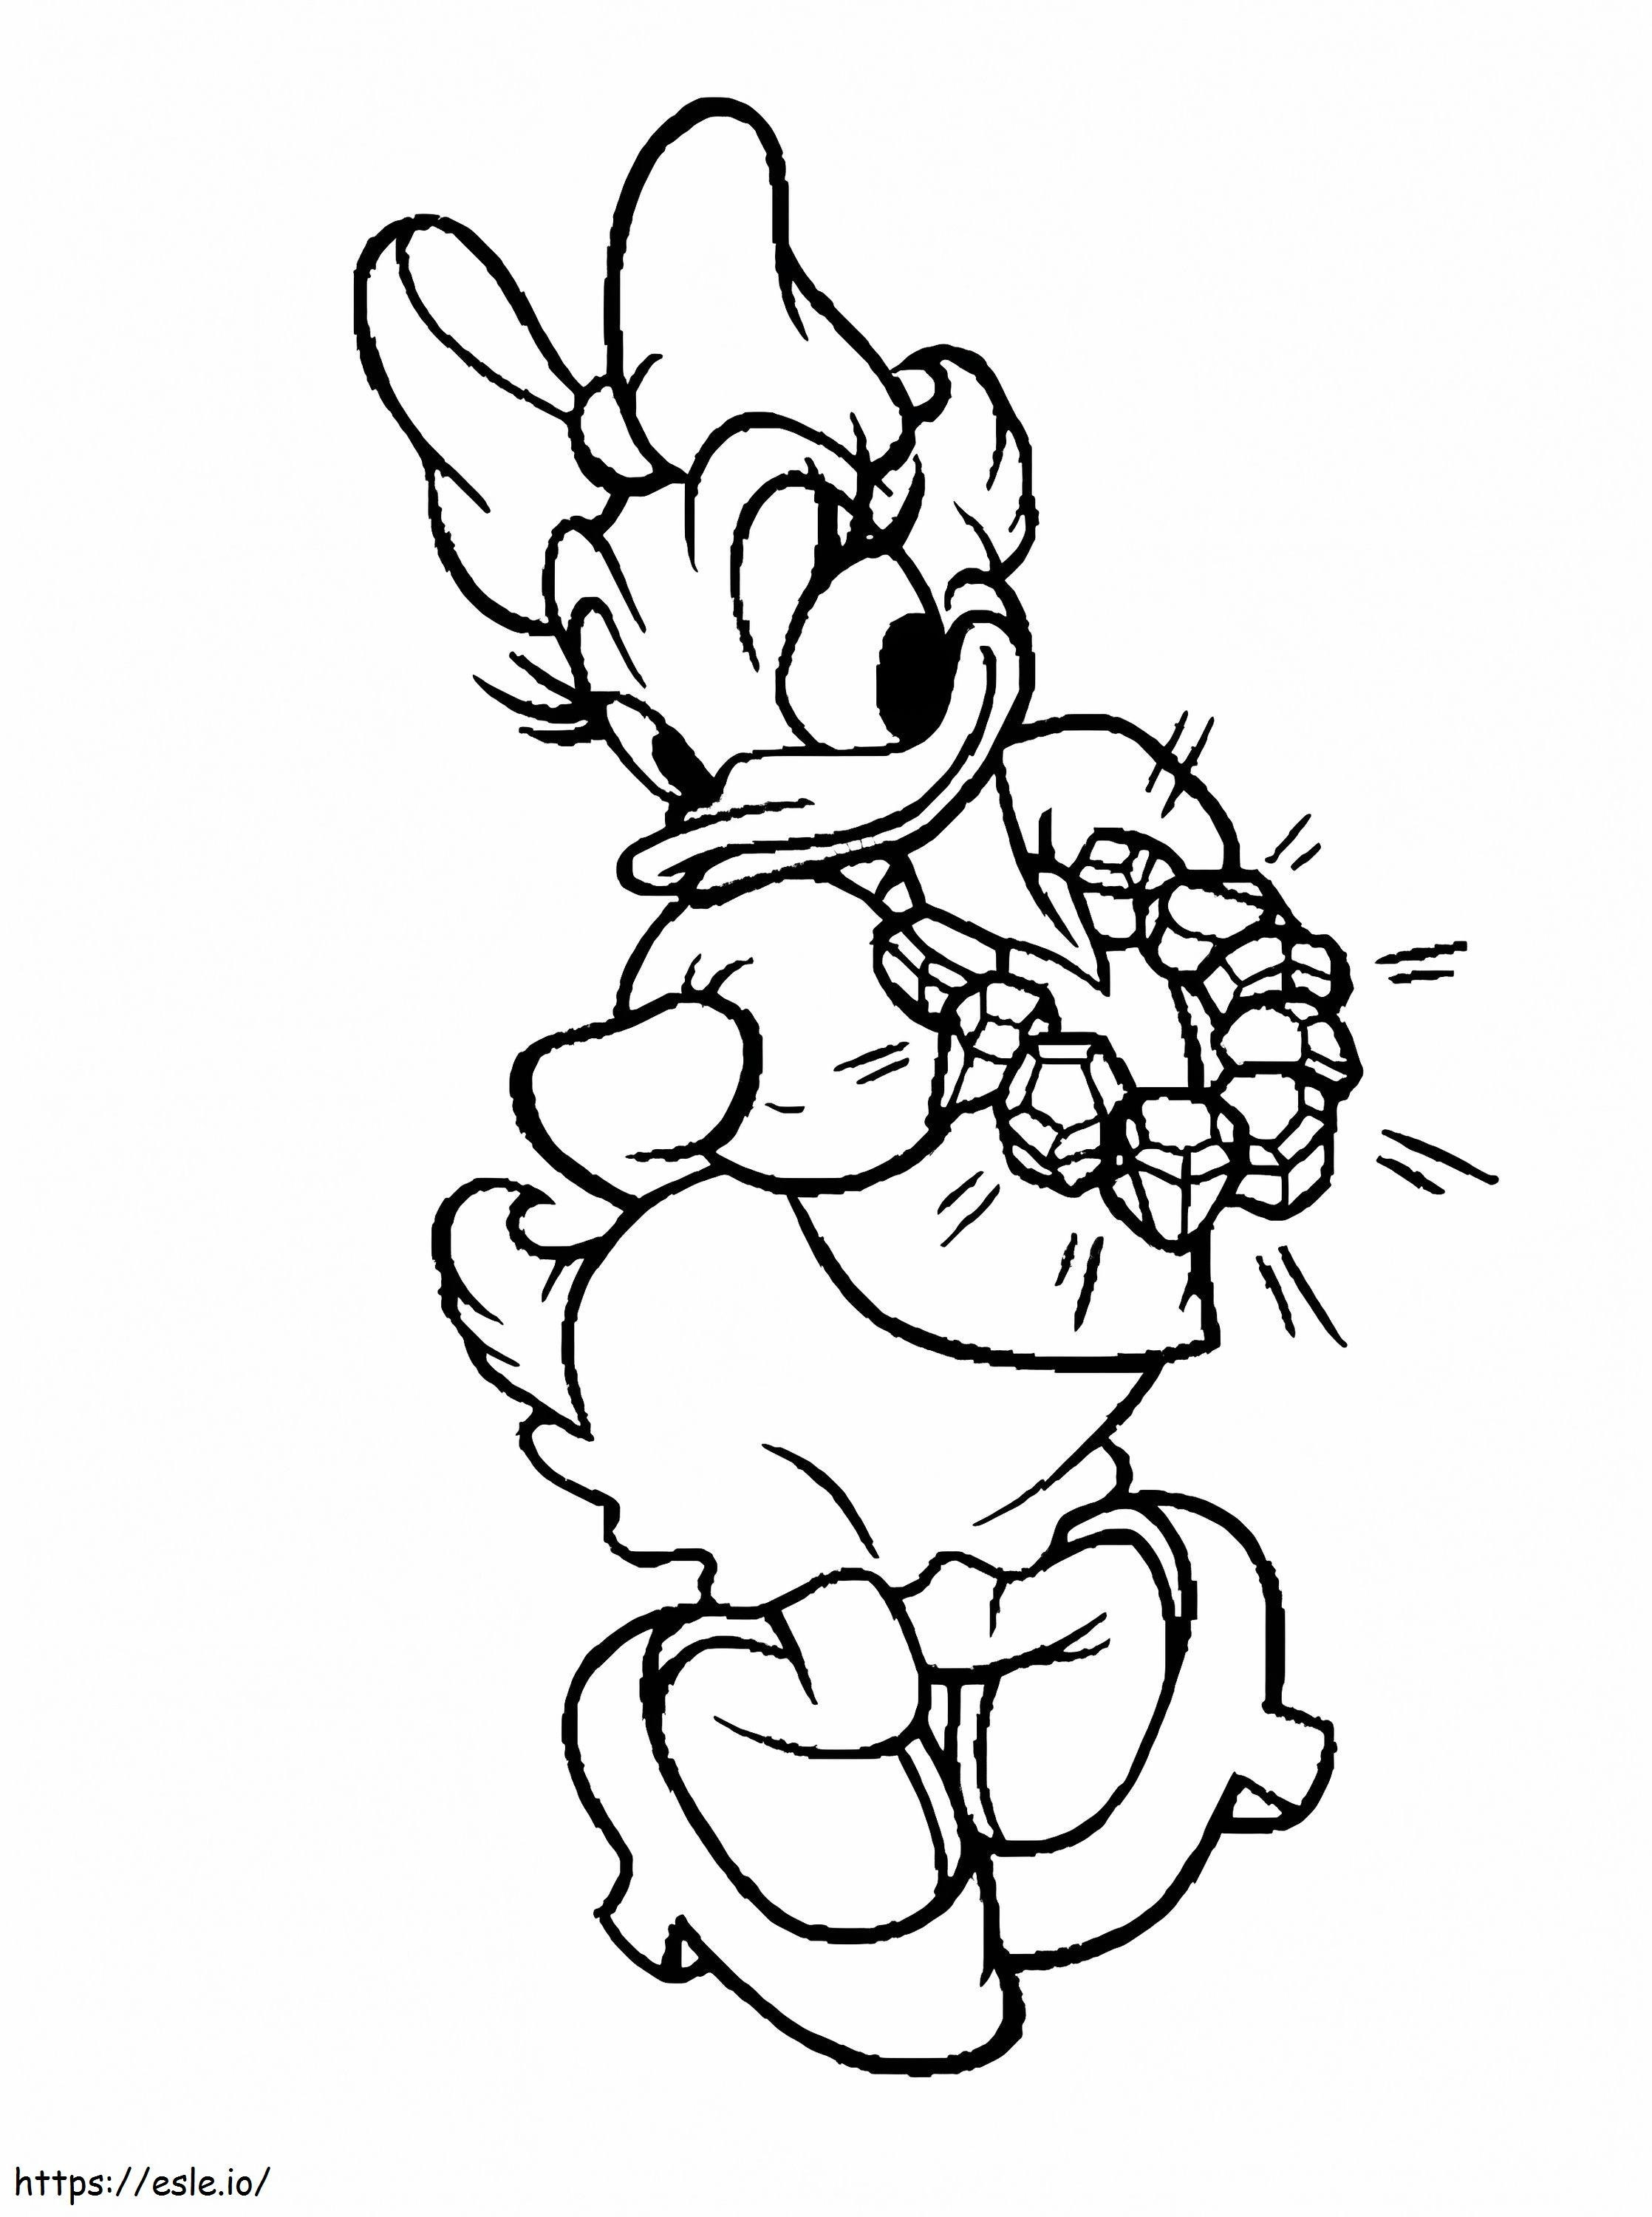 Daisy Duck And Her Sparkling Diamond Necklace coloring page